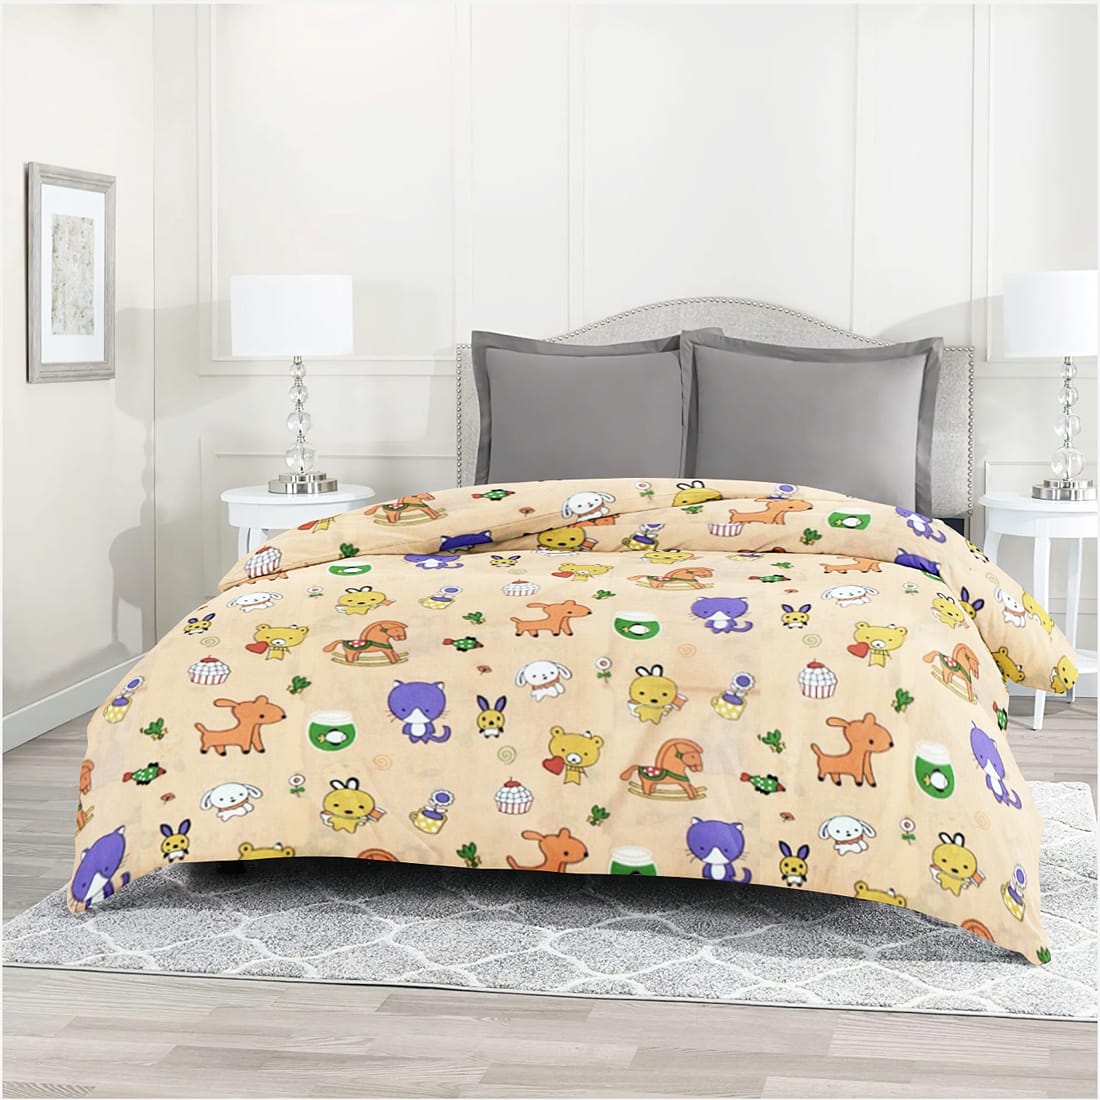 Kids Teddy Print Single Bed Cotton Duvet Cover with Zipper in Peach online (1pc)